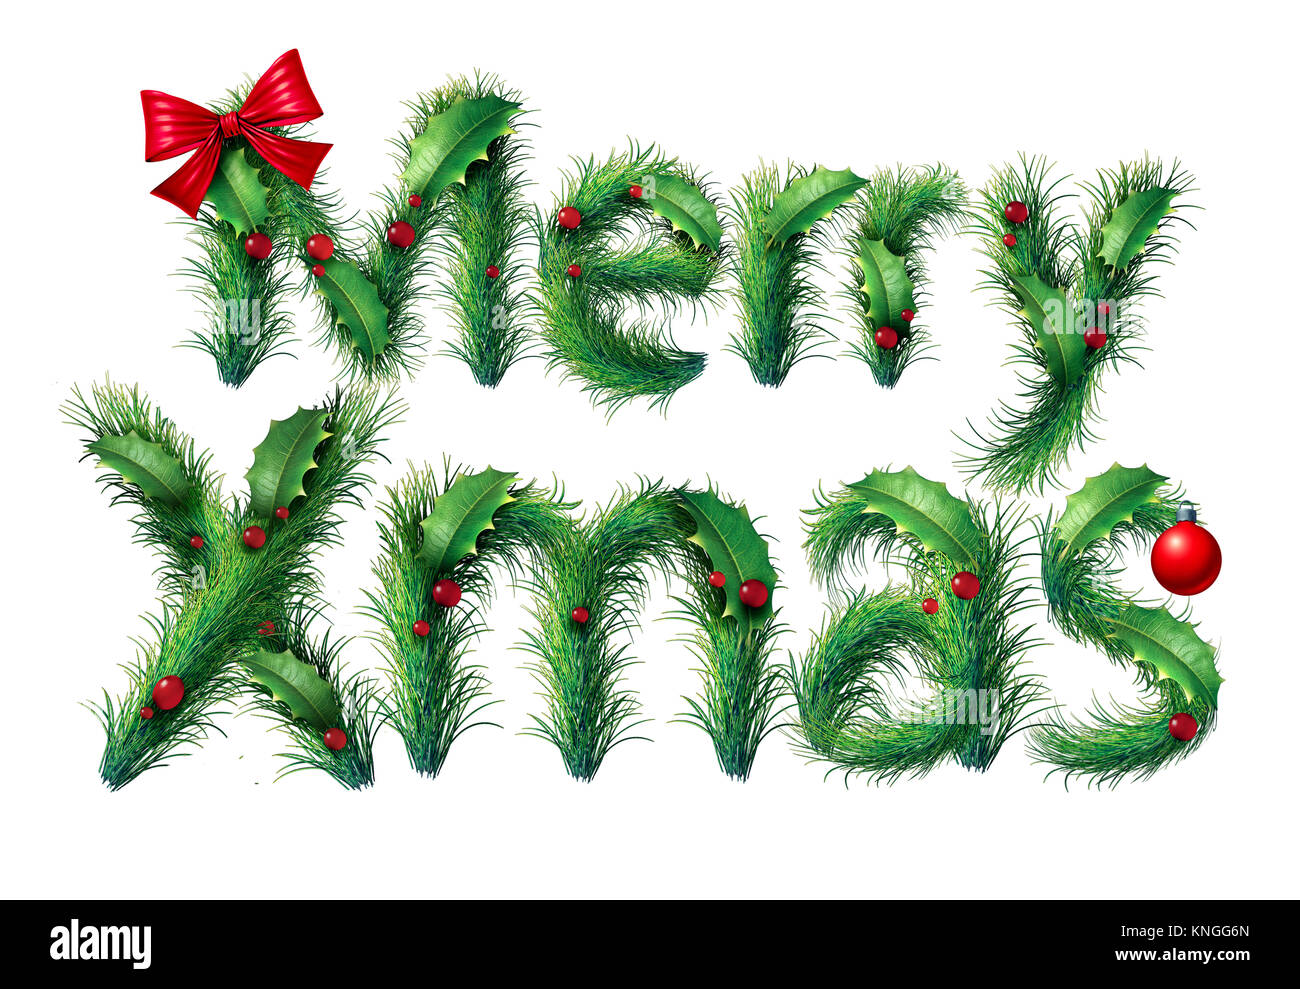 Merry xmas and Christmas text as a winter seasonal holiday symbol with lettering made out of ornaments and season decoratrions isolated. Stock Photo